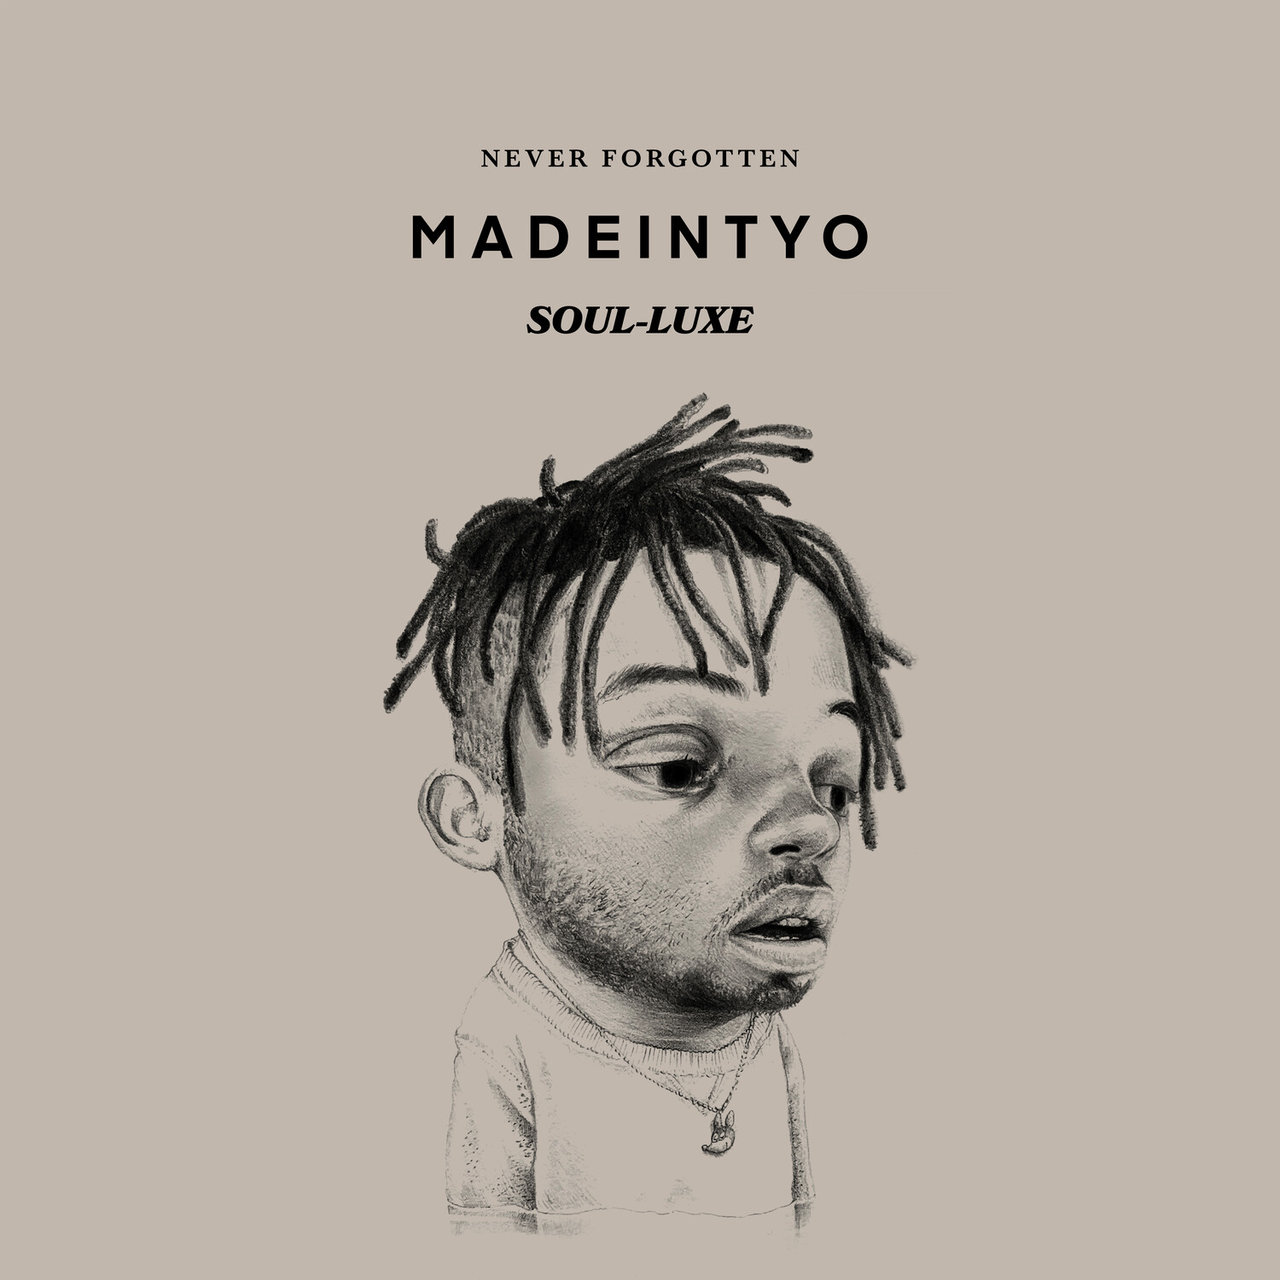 Madeintyo Gives Soulection The Green Light To Remix His 2020 Album “Never Forgotten”